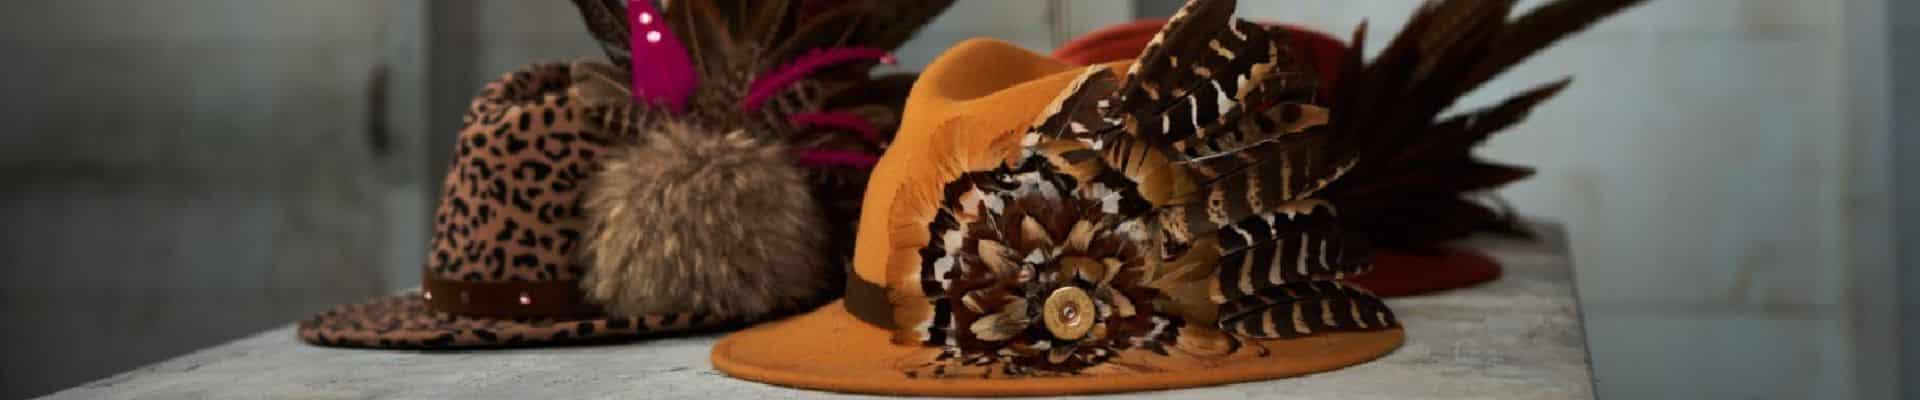 Three hats on a surface with feathers attached to them